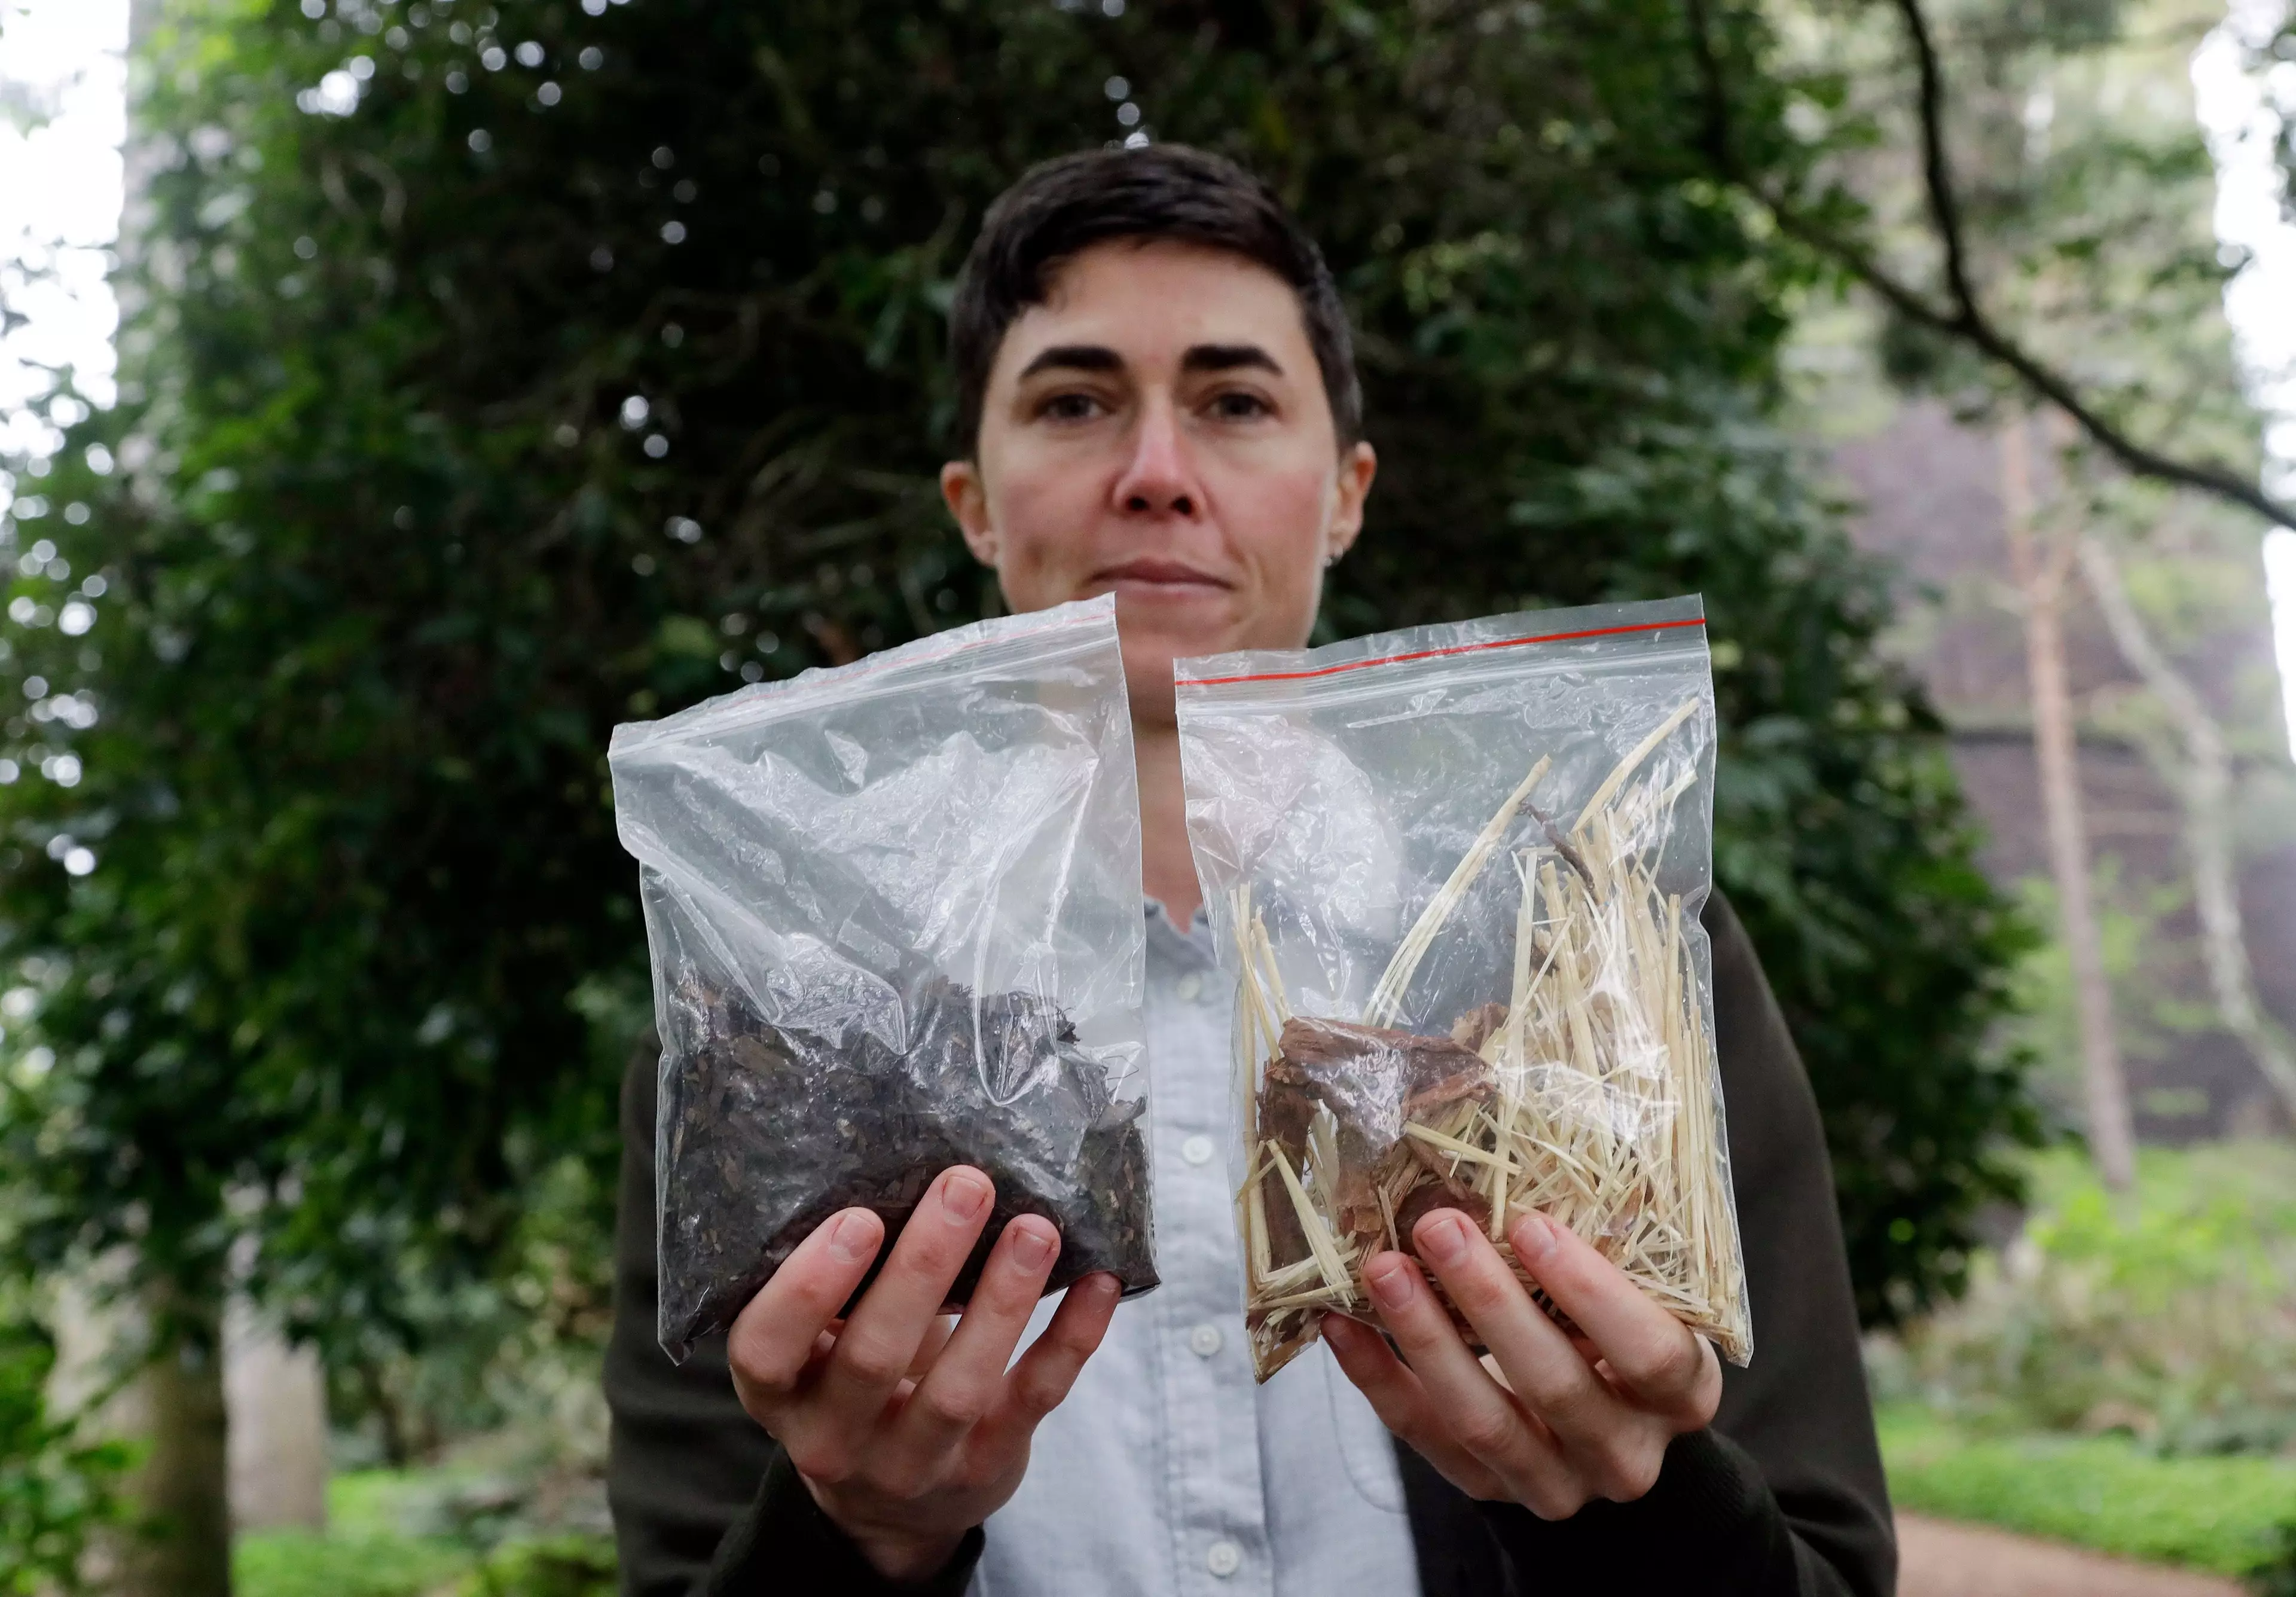 Katrina Spade, founder of Recompose. In her right hand she holds compost material from the decomposition of a cow; in her left, wood chips, alfalfa and straw used in the process.